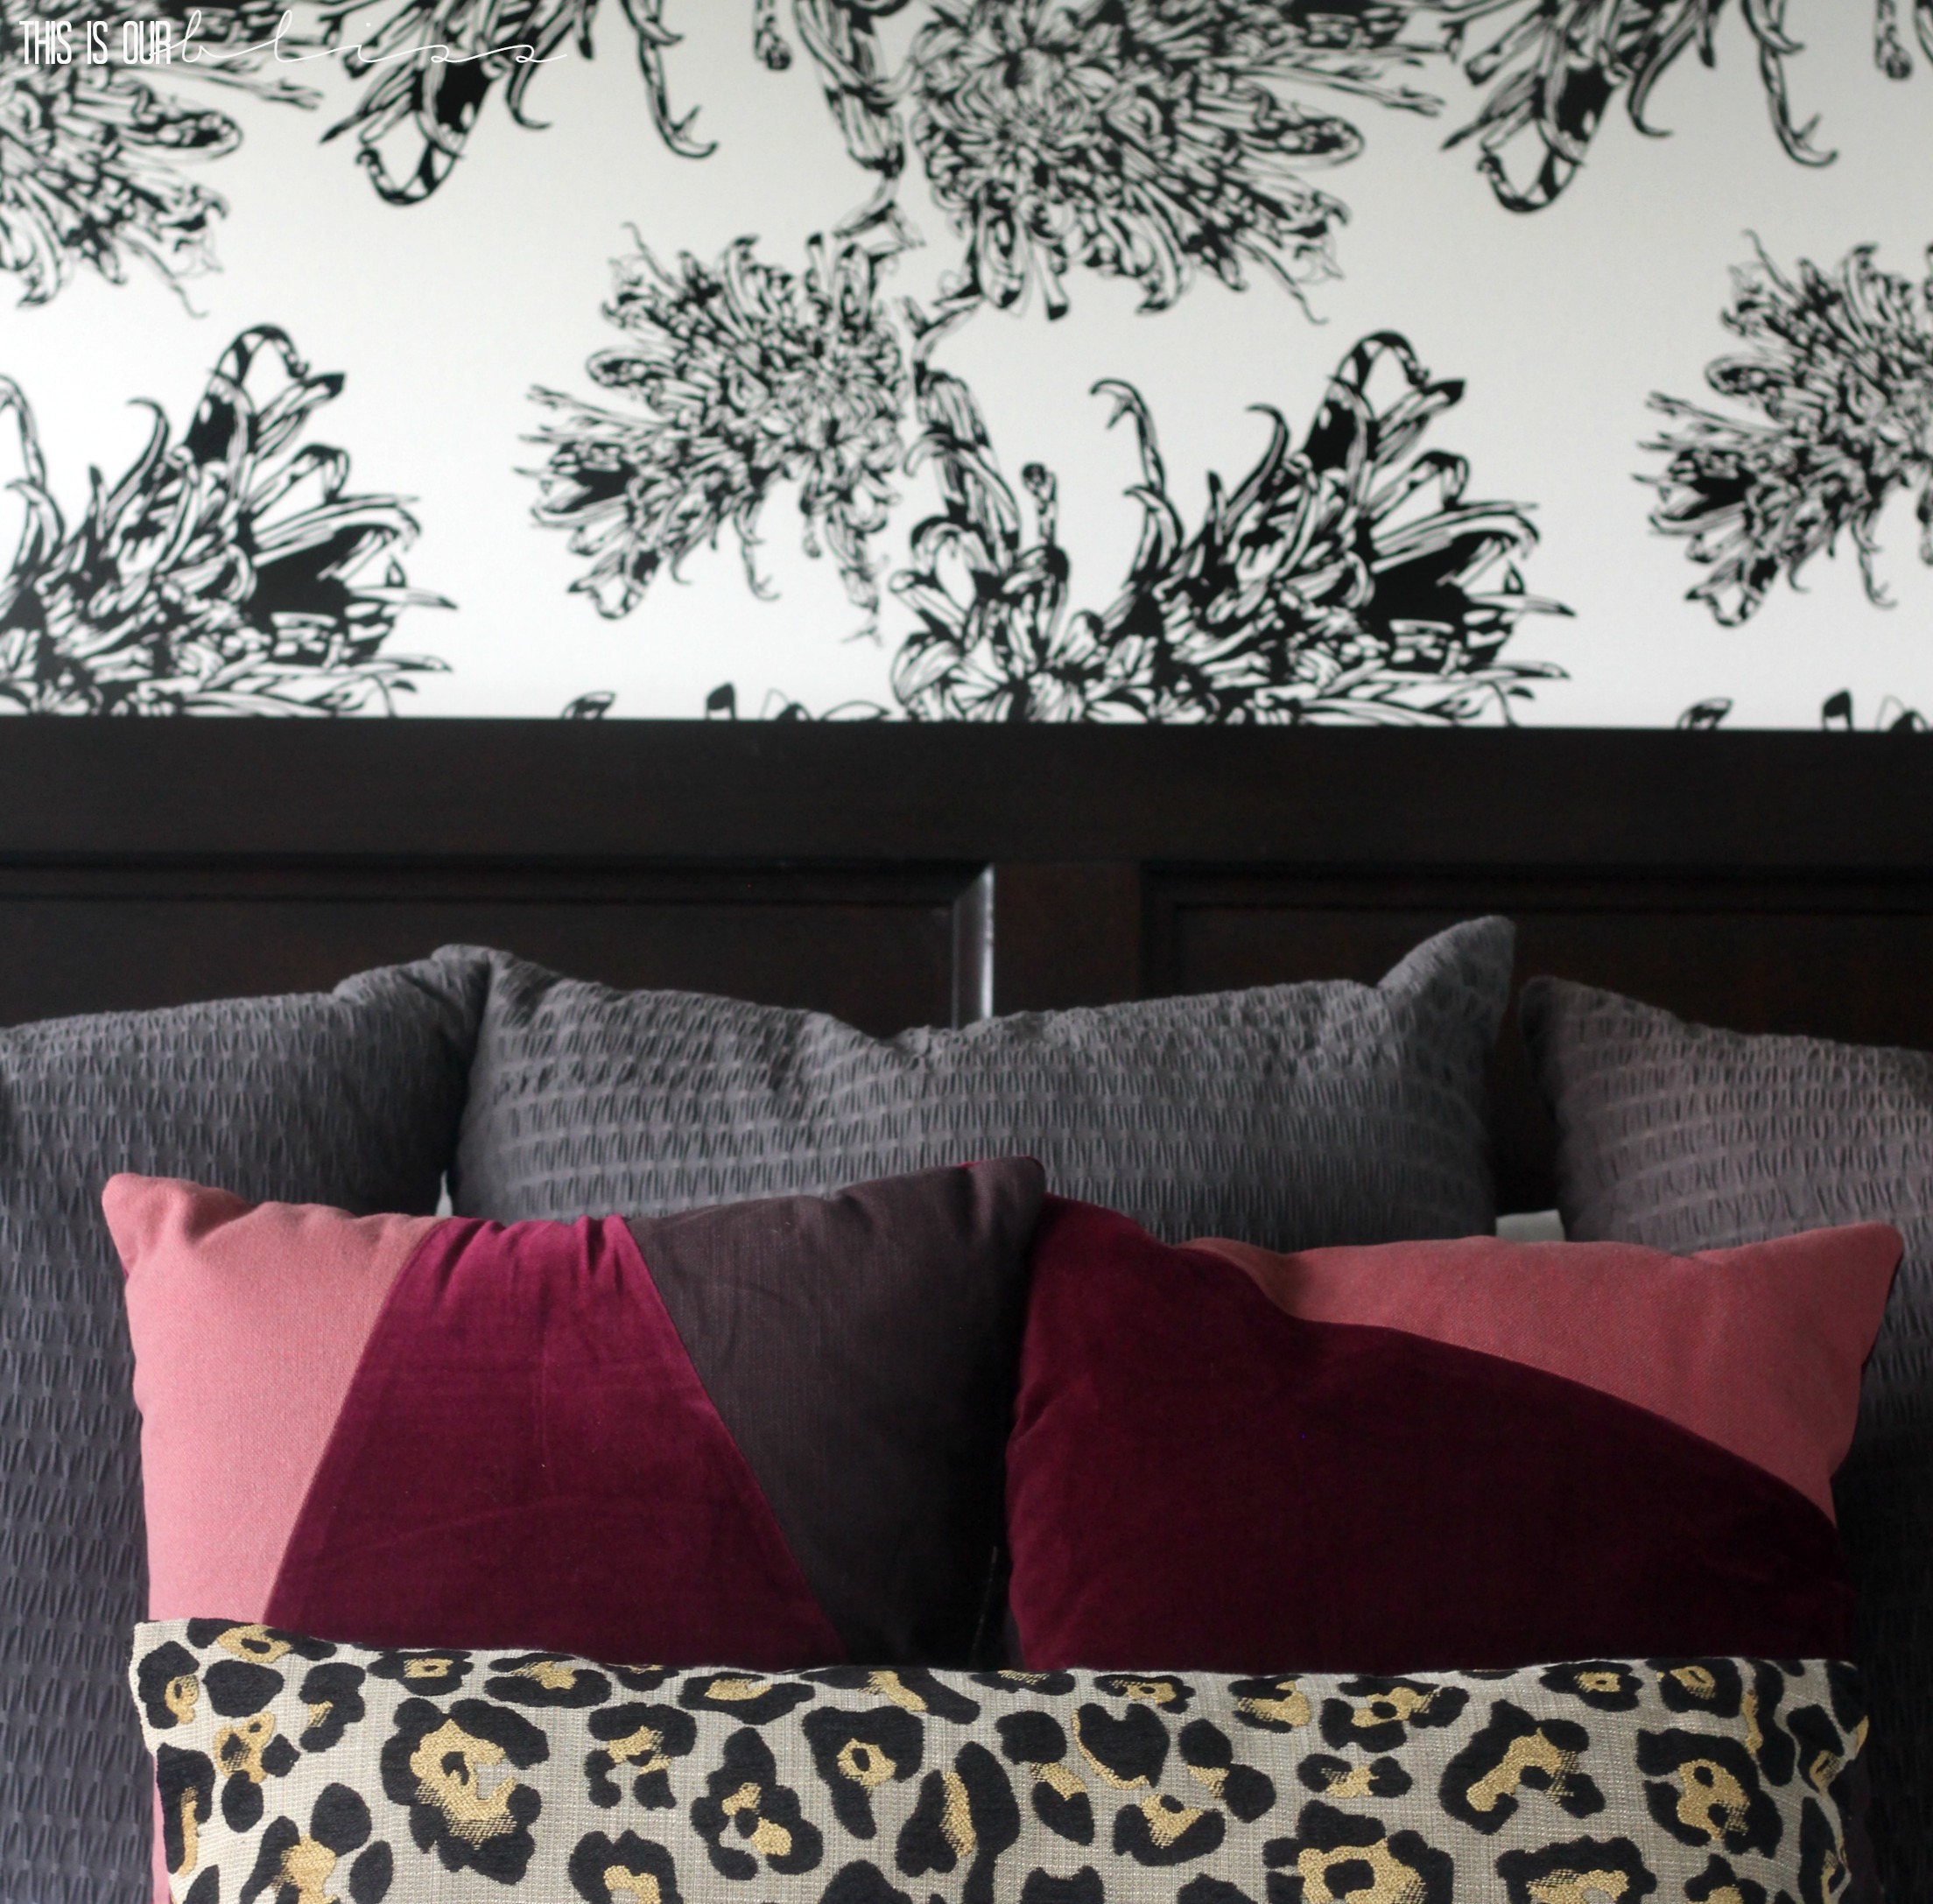 Chic wallpaper with berry colored and leopard print pillows | This is our Bliss | www.thisisourbliss.com